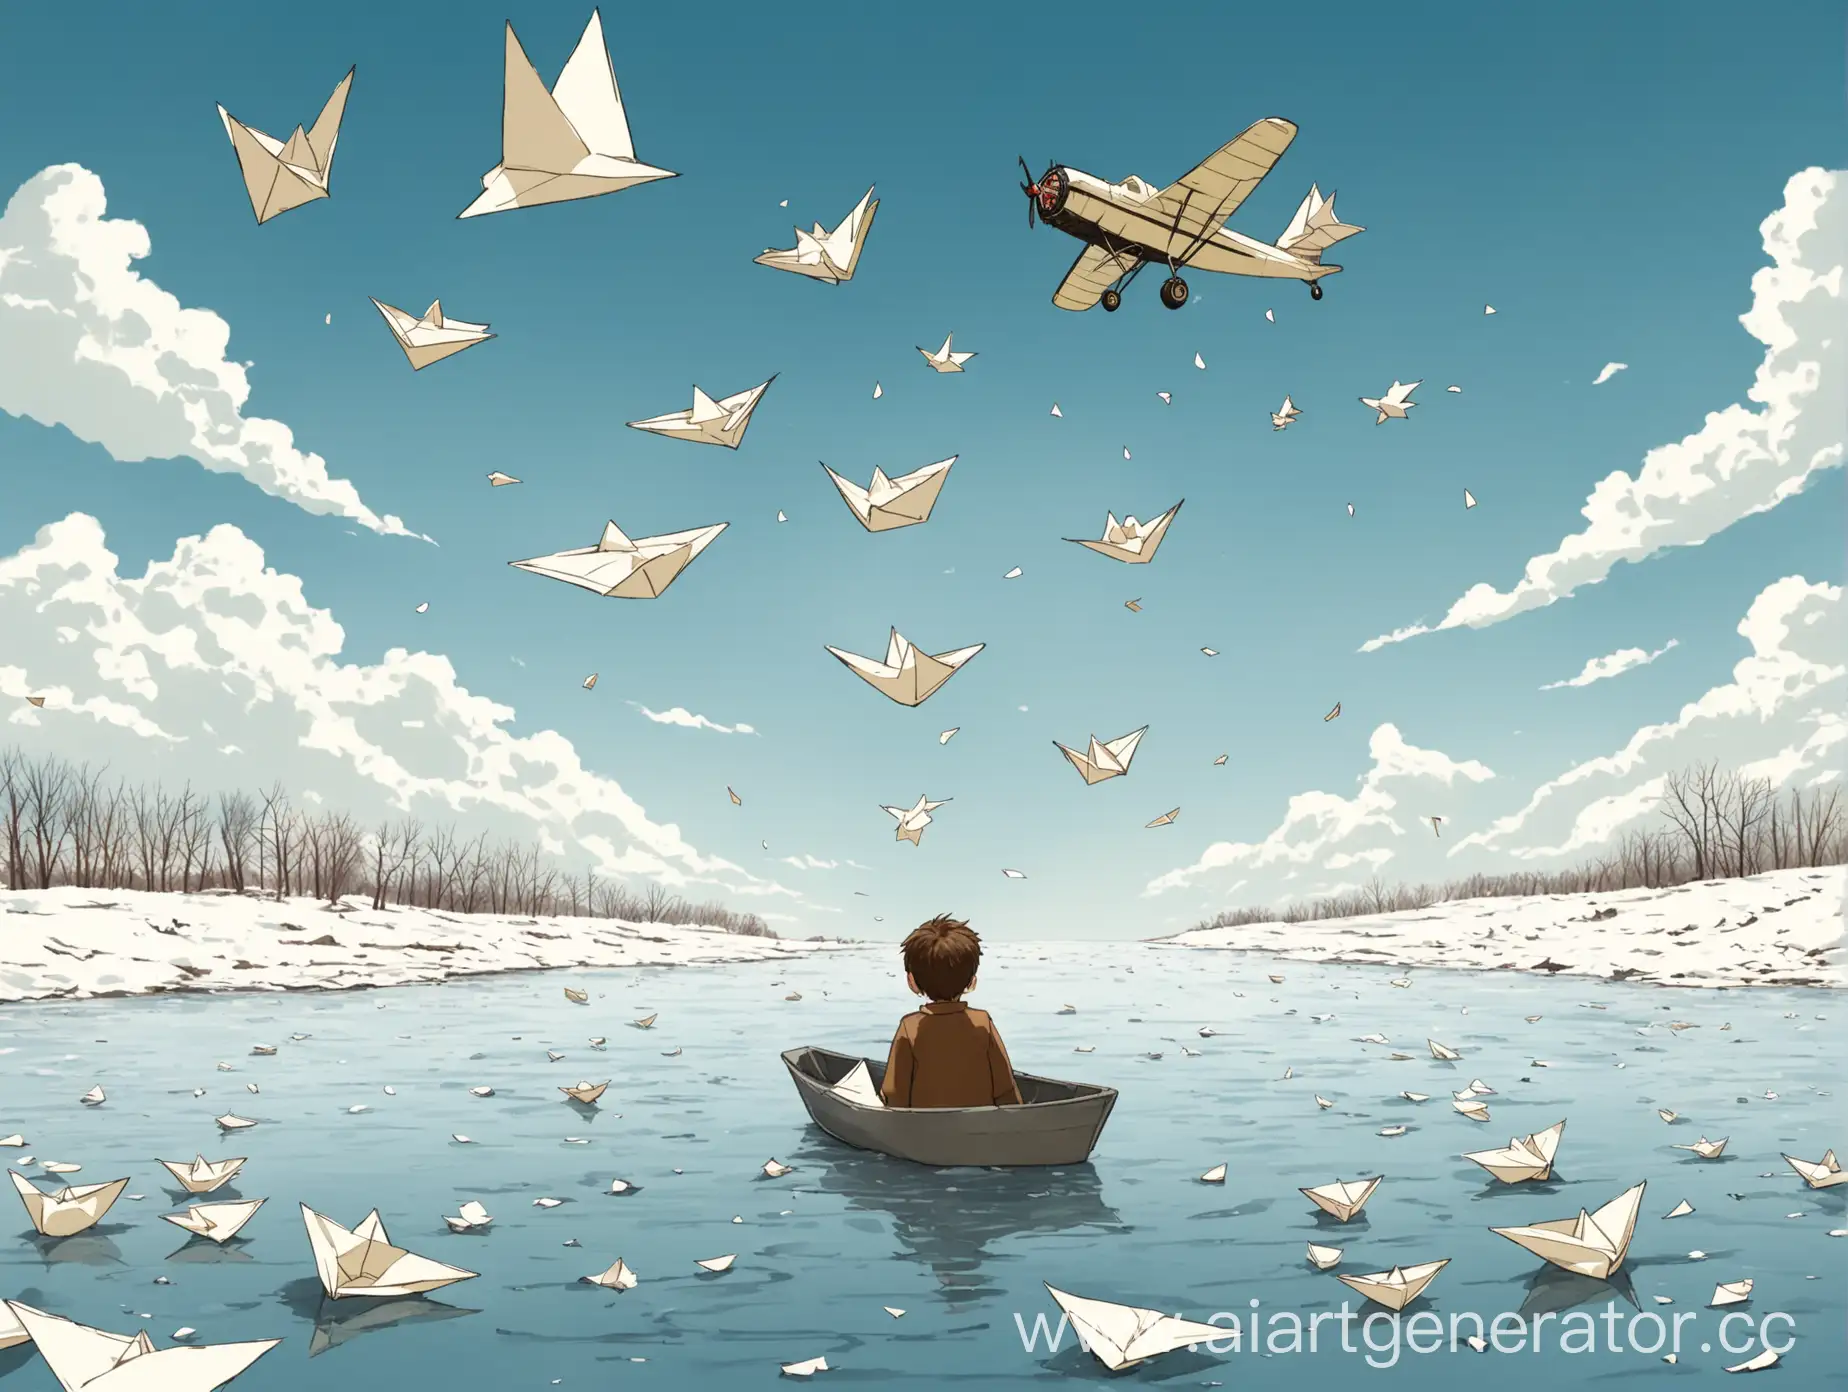 It was spring, the snow was melting, and the streams were flowing. Sasha was floating paper boats in the water. Suddenly something buzzed overhead. Sasha thought it was a bird flying. There it was already above his head. It was an airplane. Sasha stared at the airplane, and the boats drifted away.